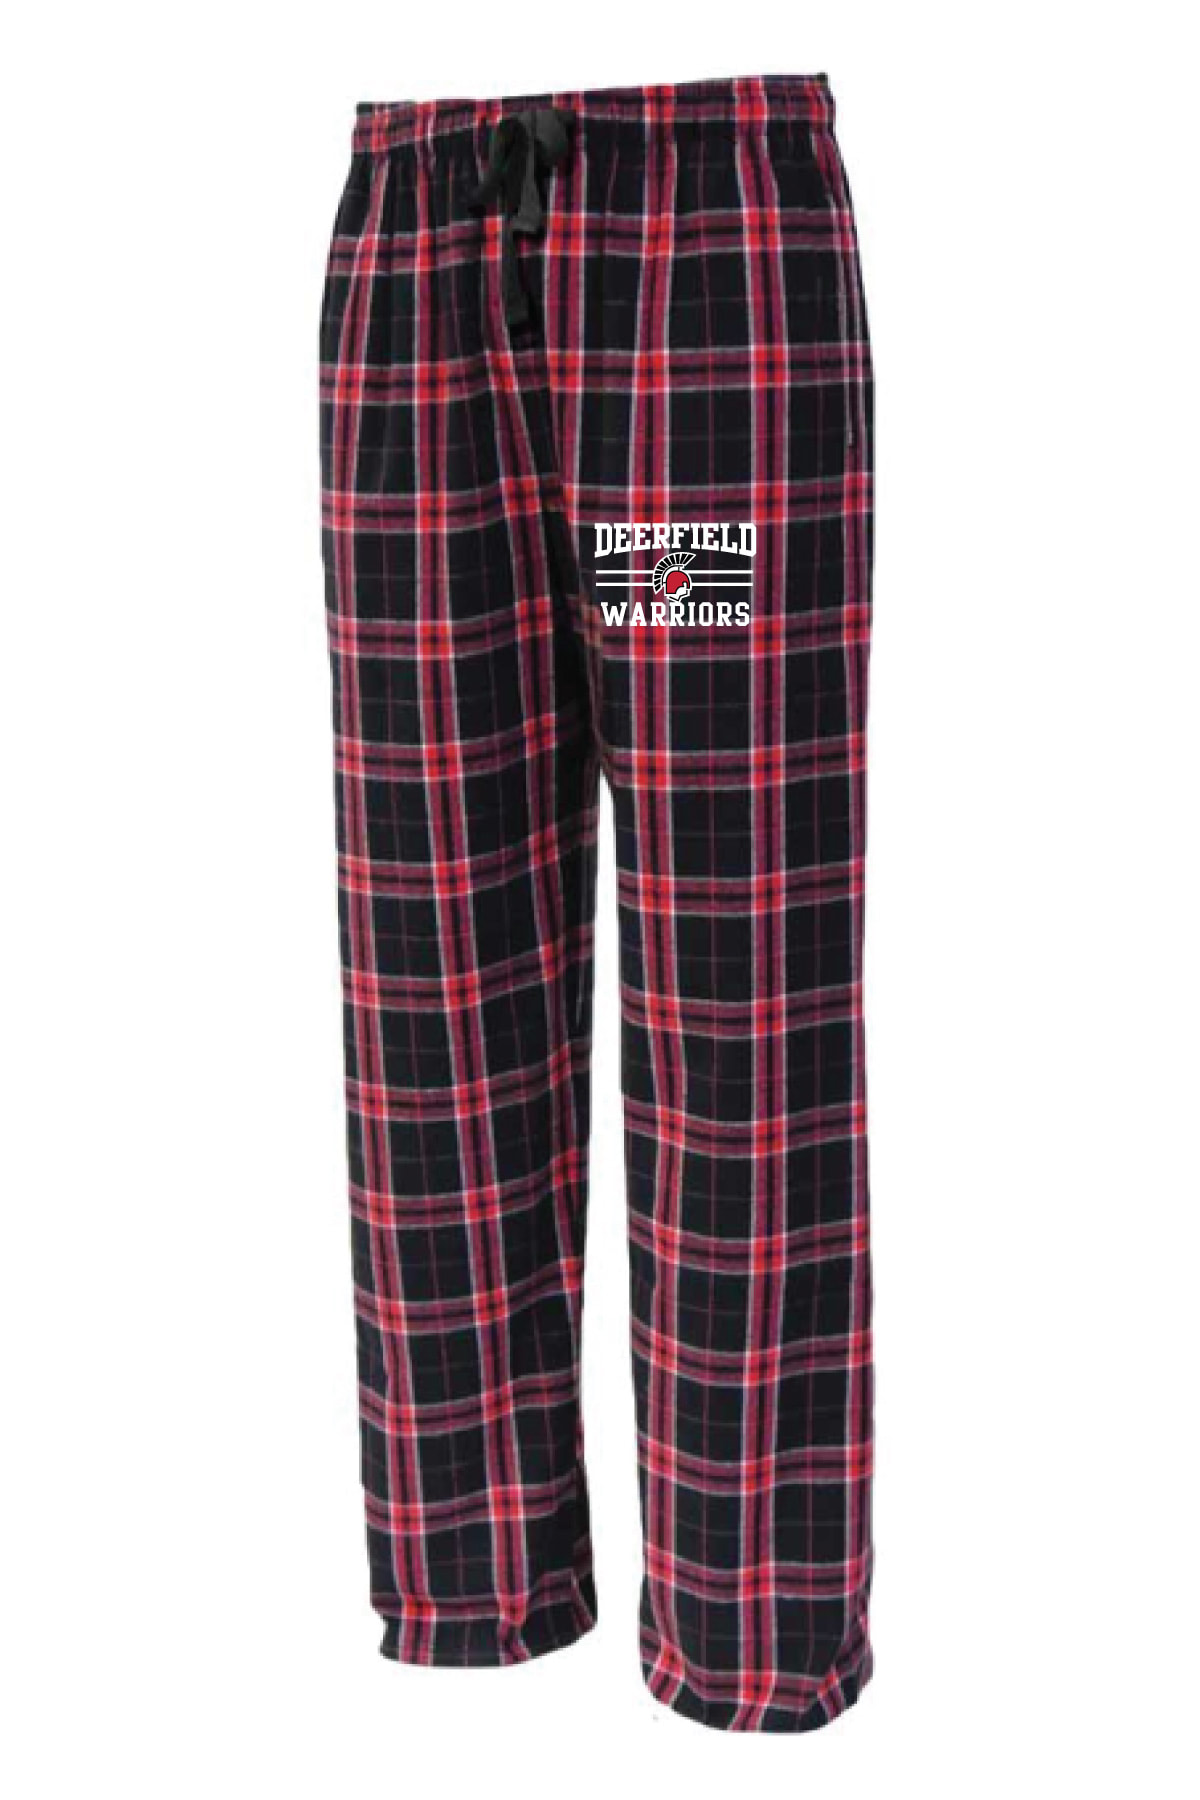 NEW STYLE! Black & Red Flannel PJ Pants w/ embroidered logo